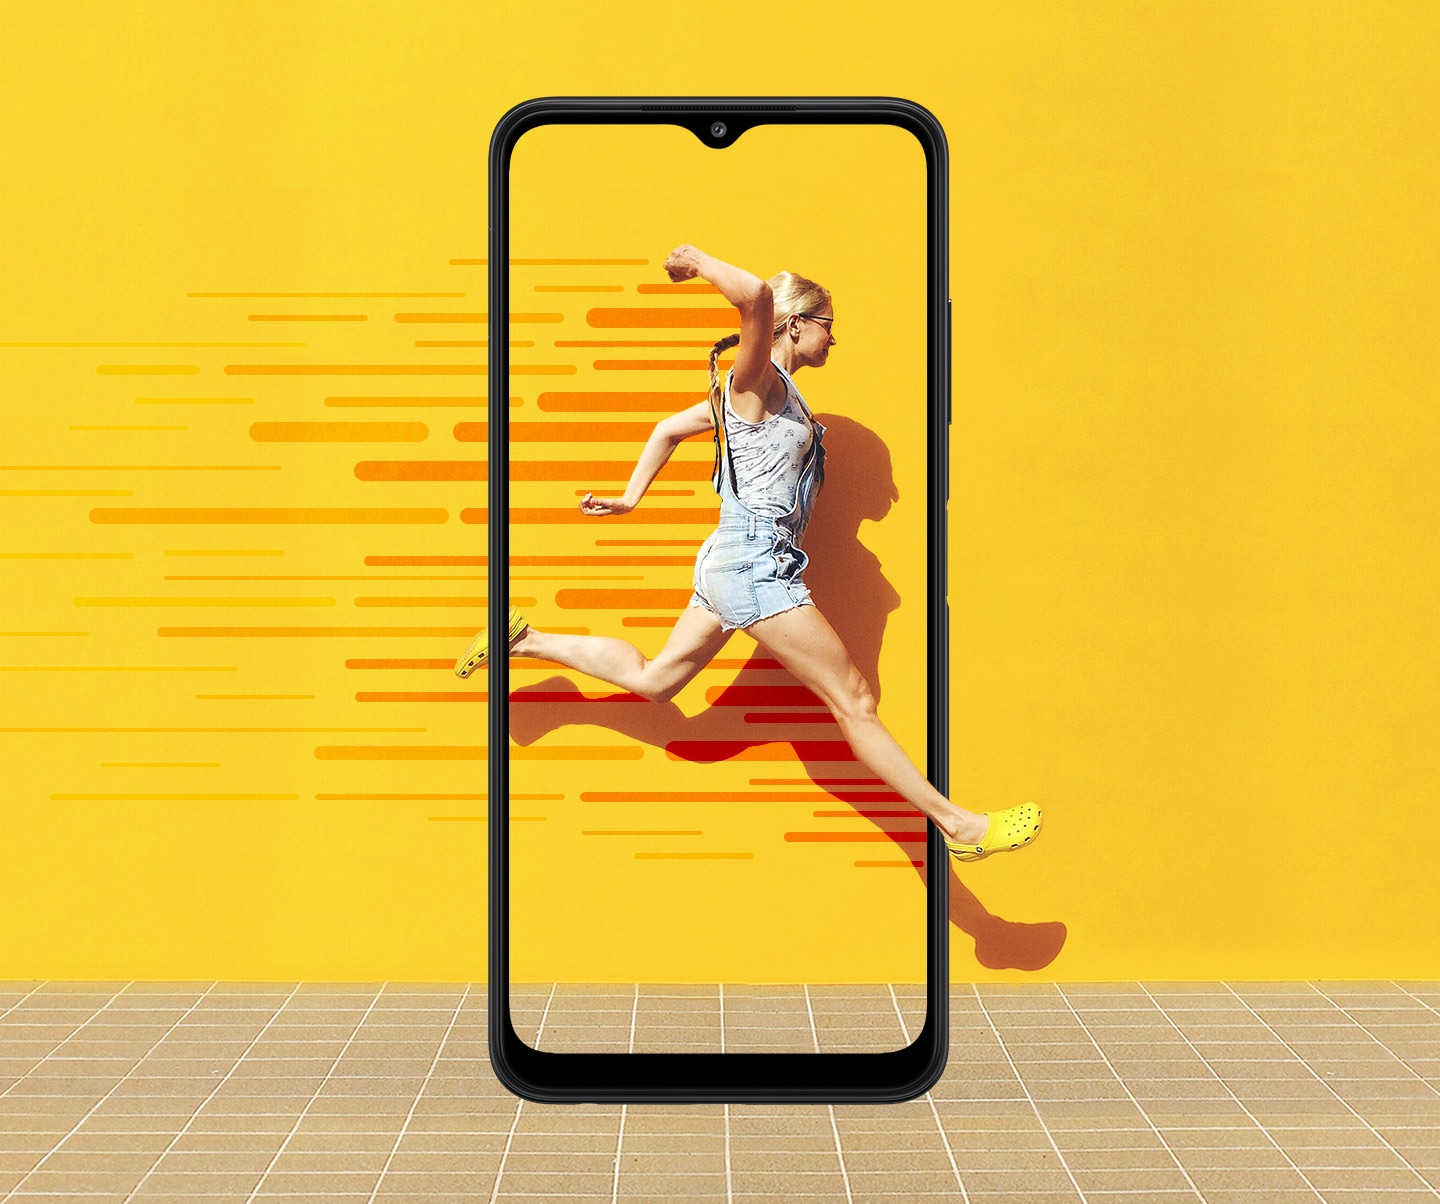 A Galaxy A22 5G is seen from the front. Onscreen, a woman leaps forward against a yellow wall, with red lines demonstrating motion. Her movement expands beyond the phone's display.